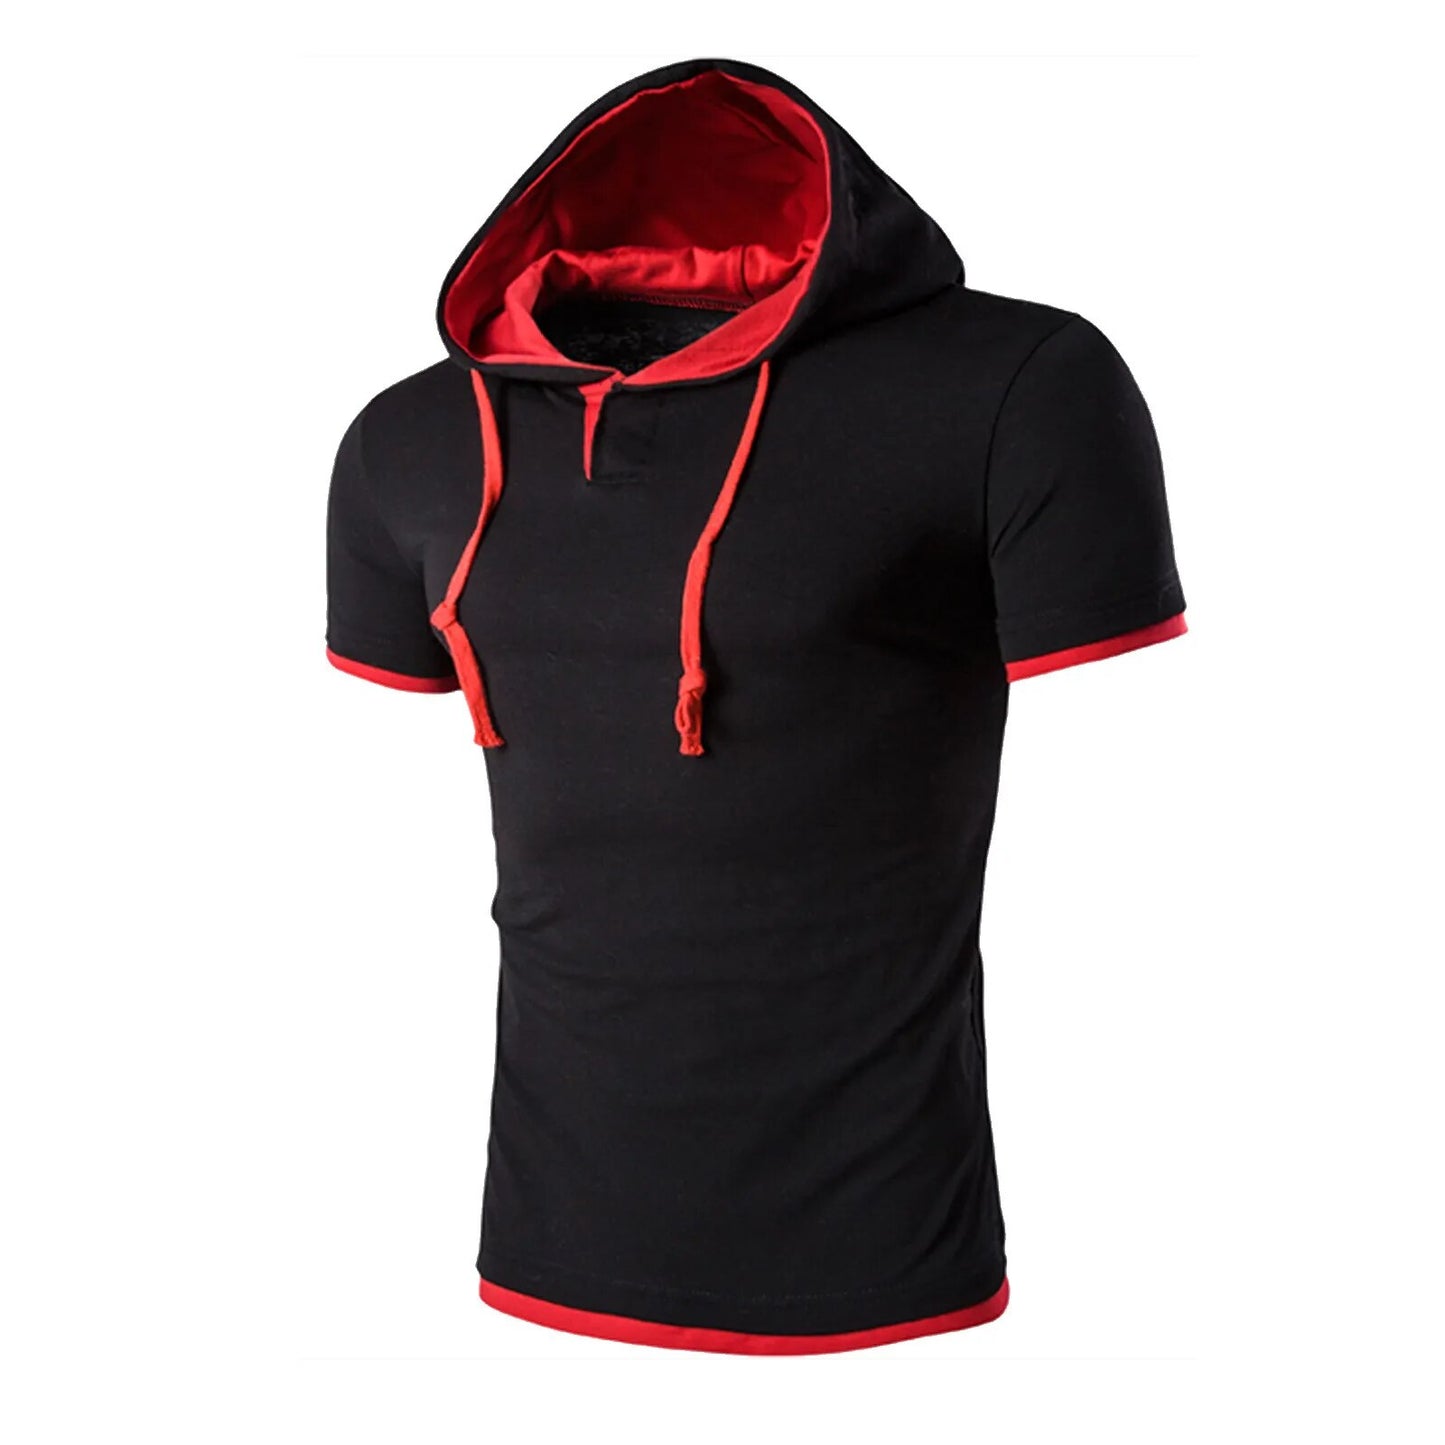 Men's Shirts Short Sleeve Men Fitness Muscle Hooded Bodybuilding Tight-drying T Shirt Tops Casual Summer Shirt For Men Clothing